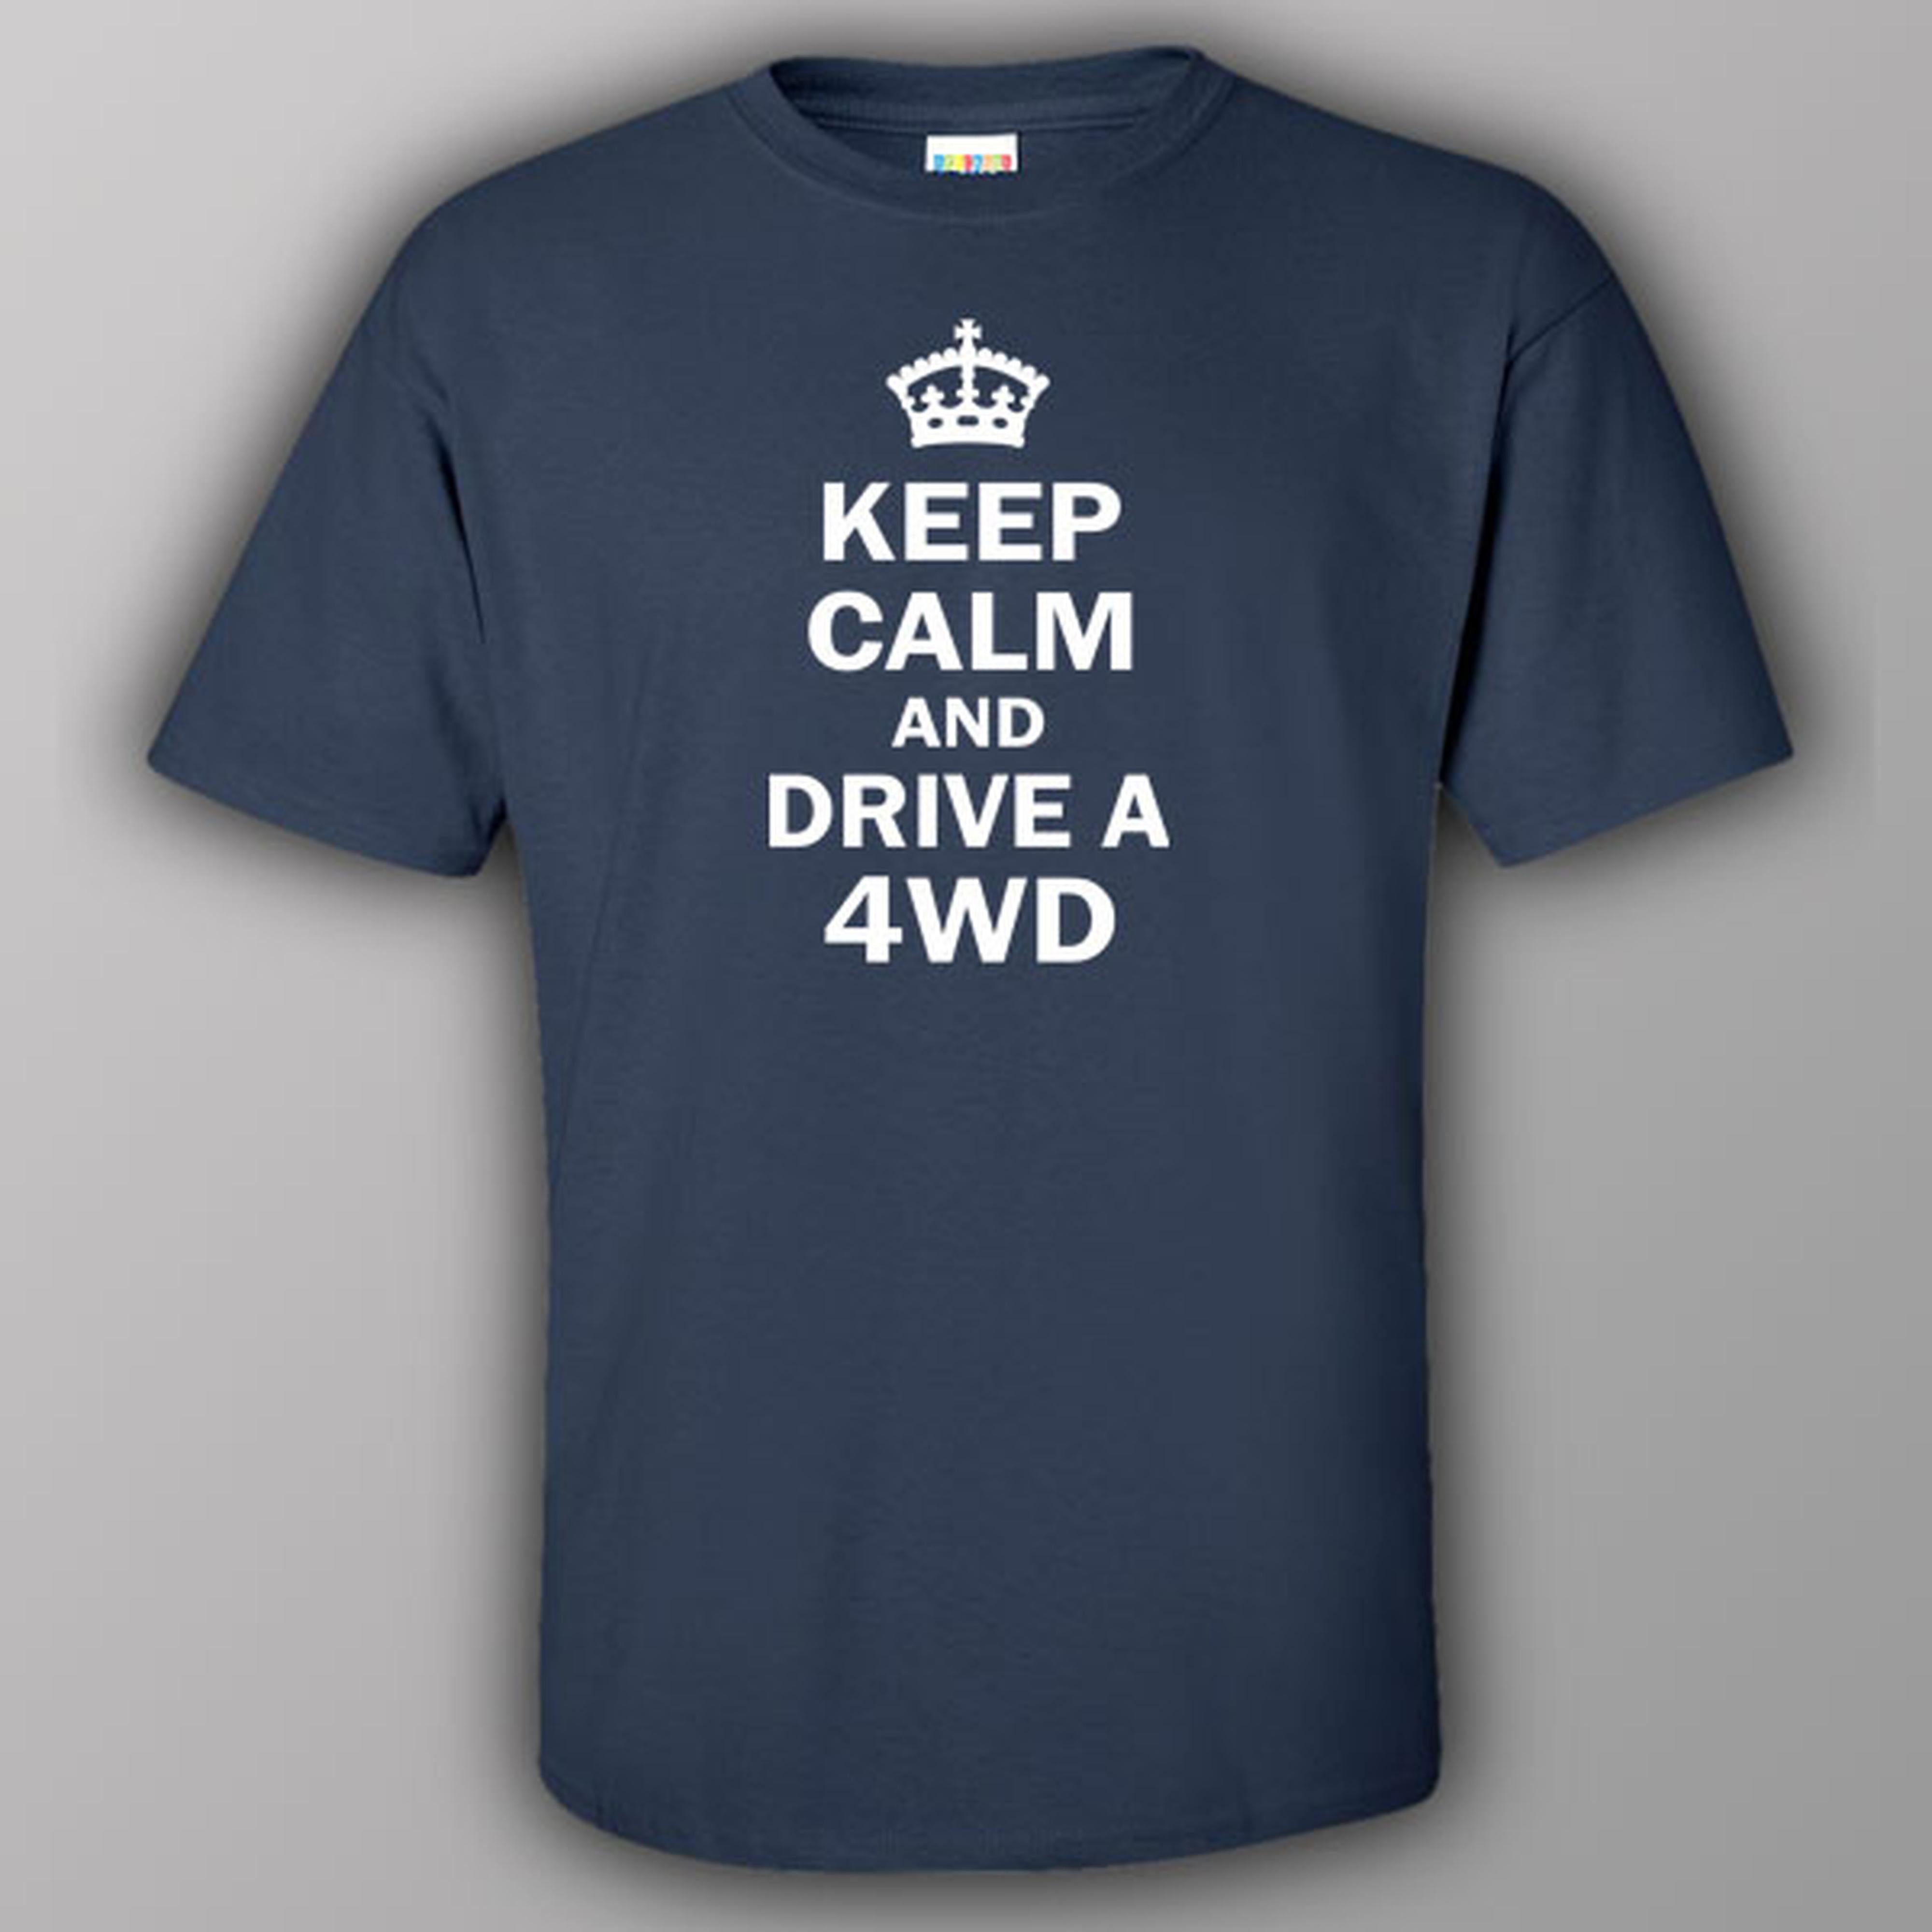 keep-calm-and-drive-a-4wd-t-shirt